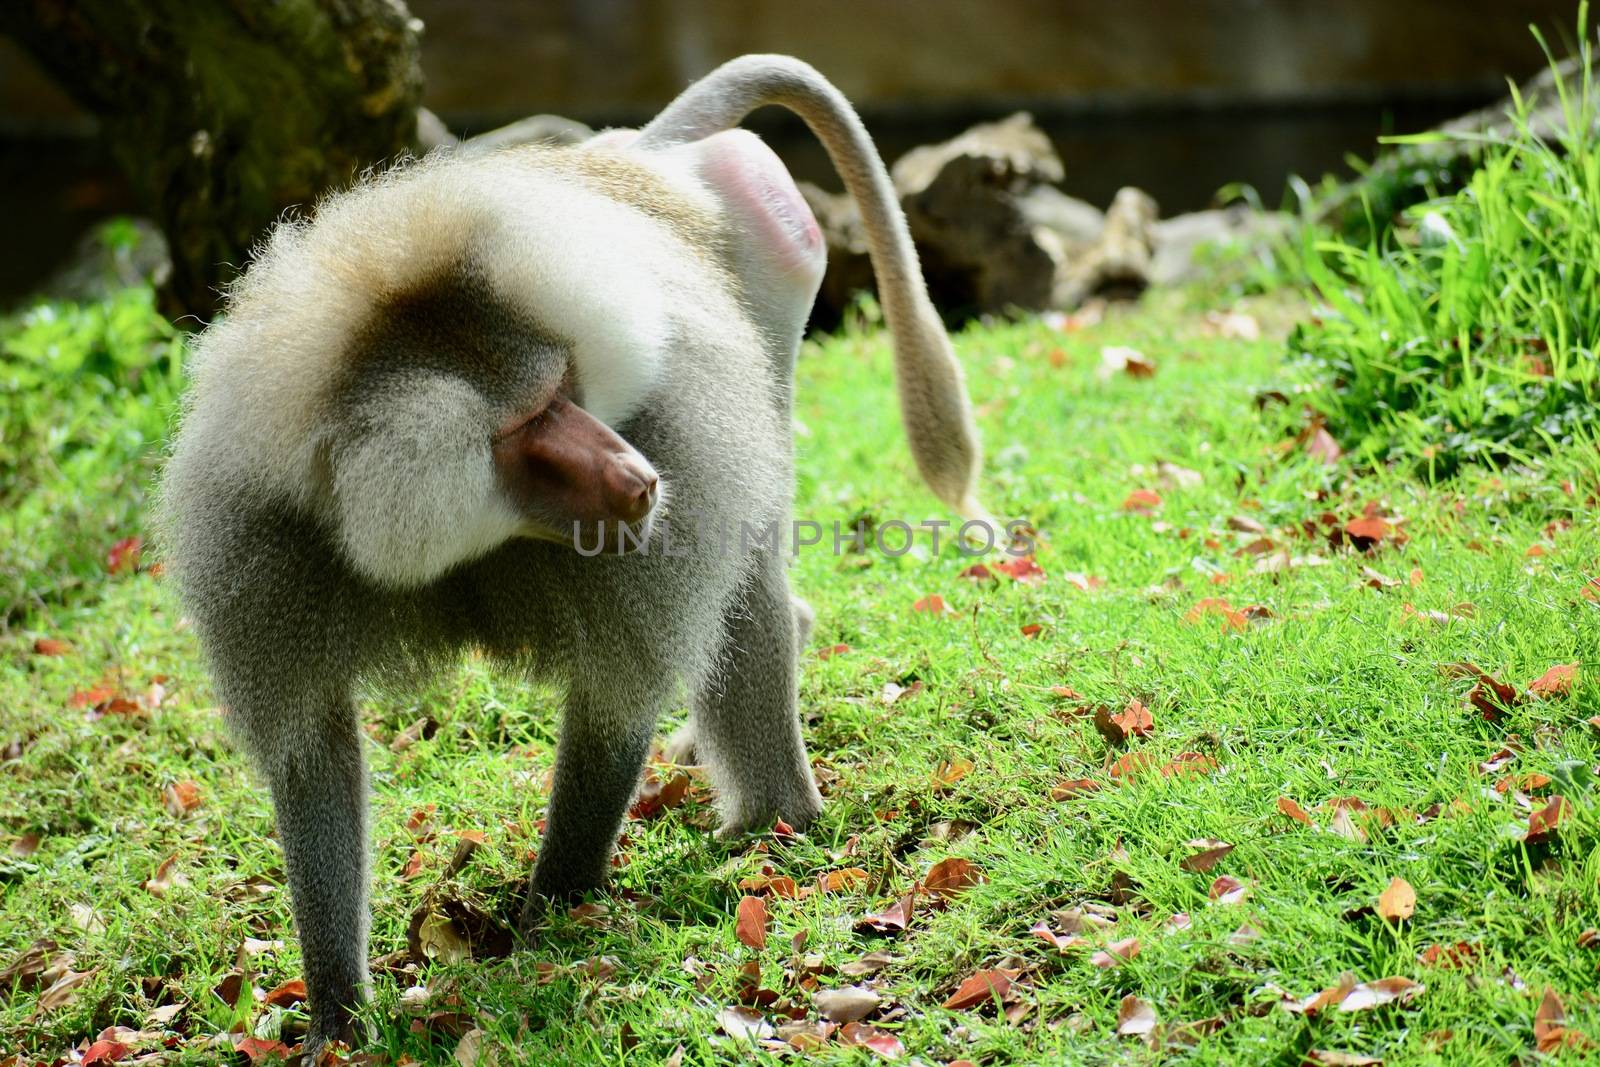 Hamadryas Baboon (Papio hamadryas), also referred to as Sacred Baboons. They belong to a group of monkeys found in Africa and Asia (Old World monkeys). by Marshalkina